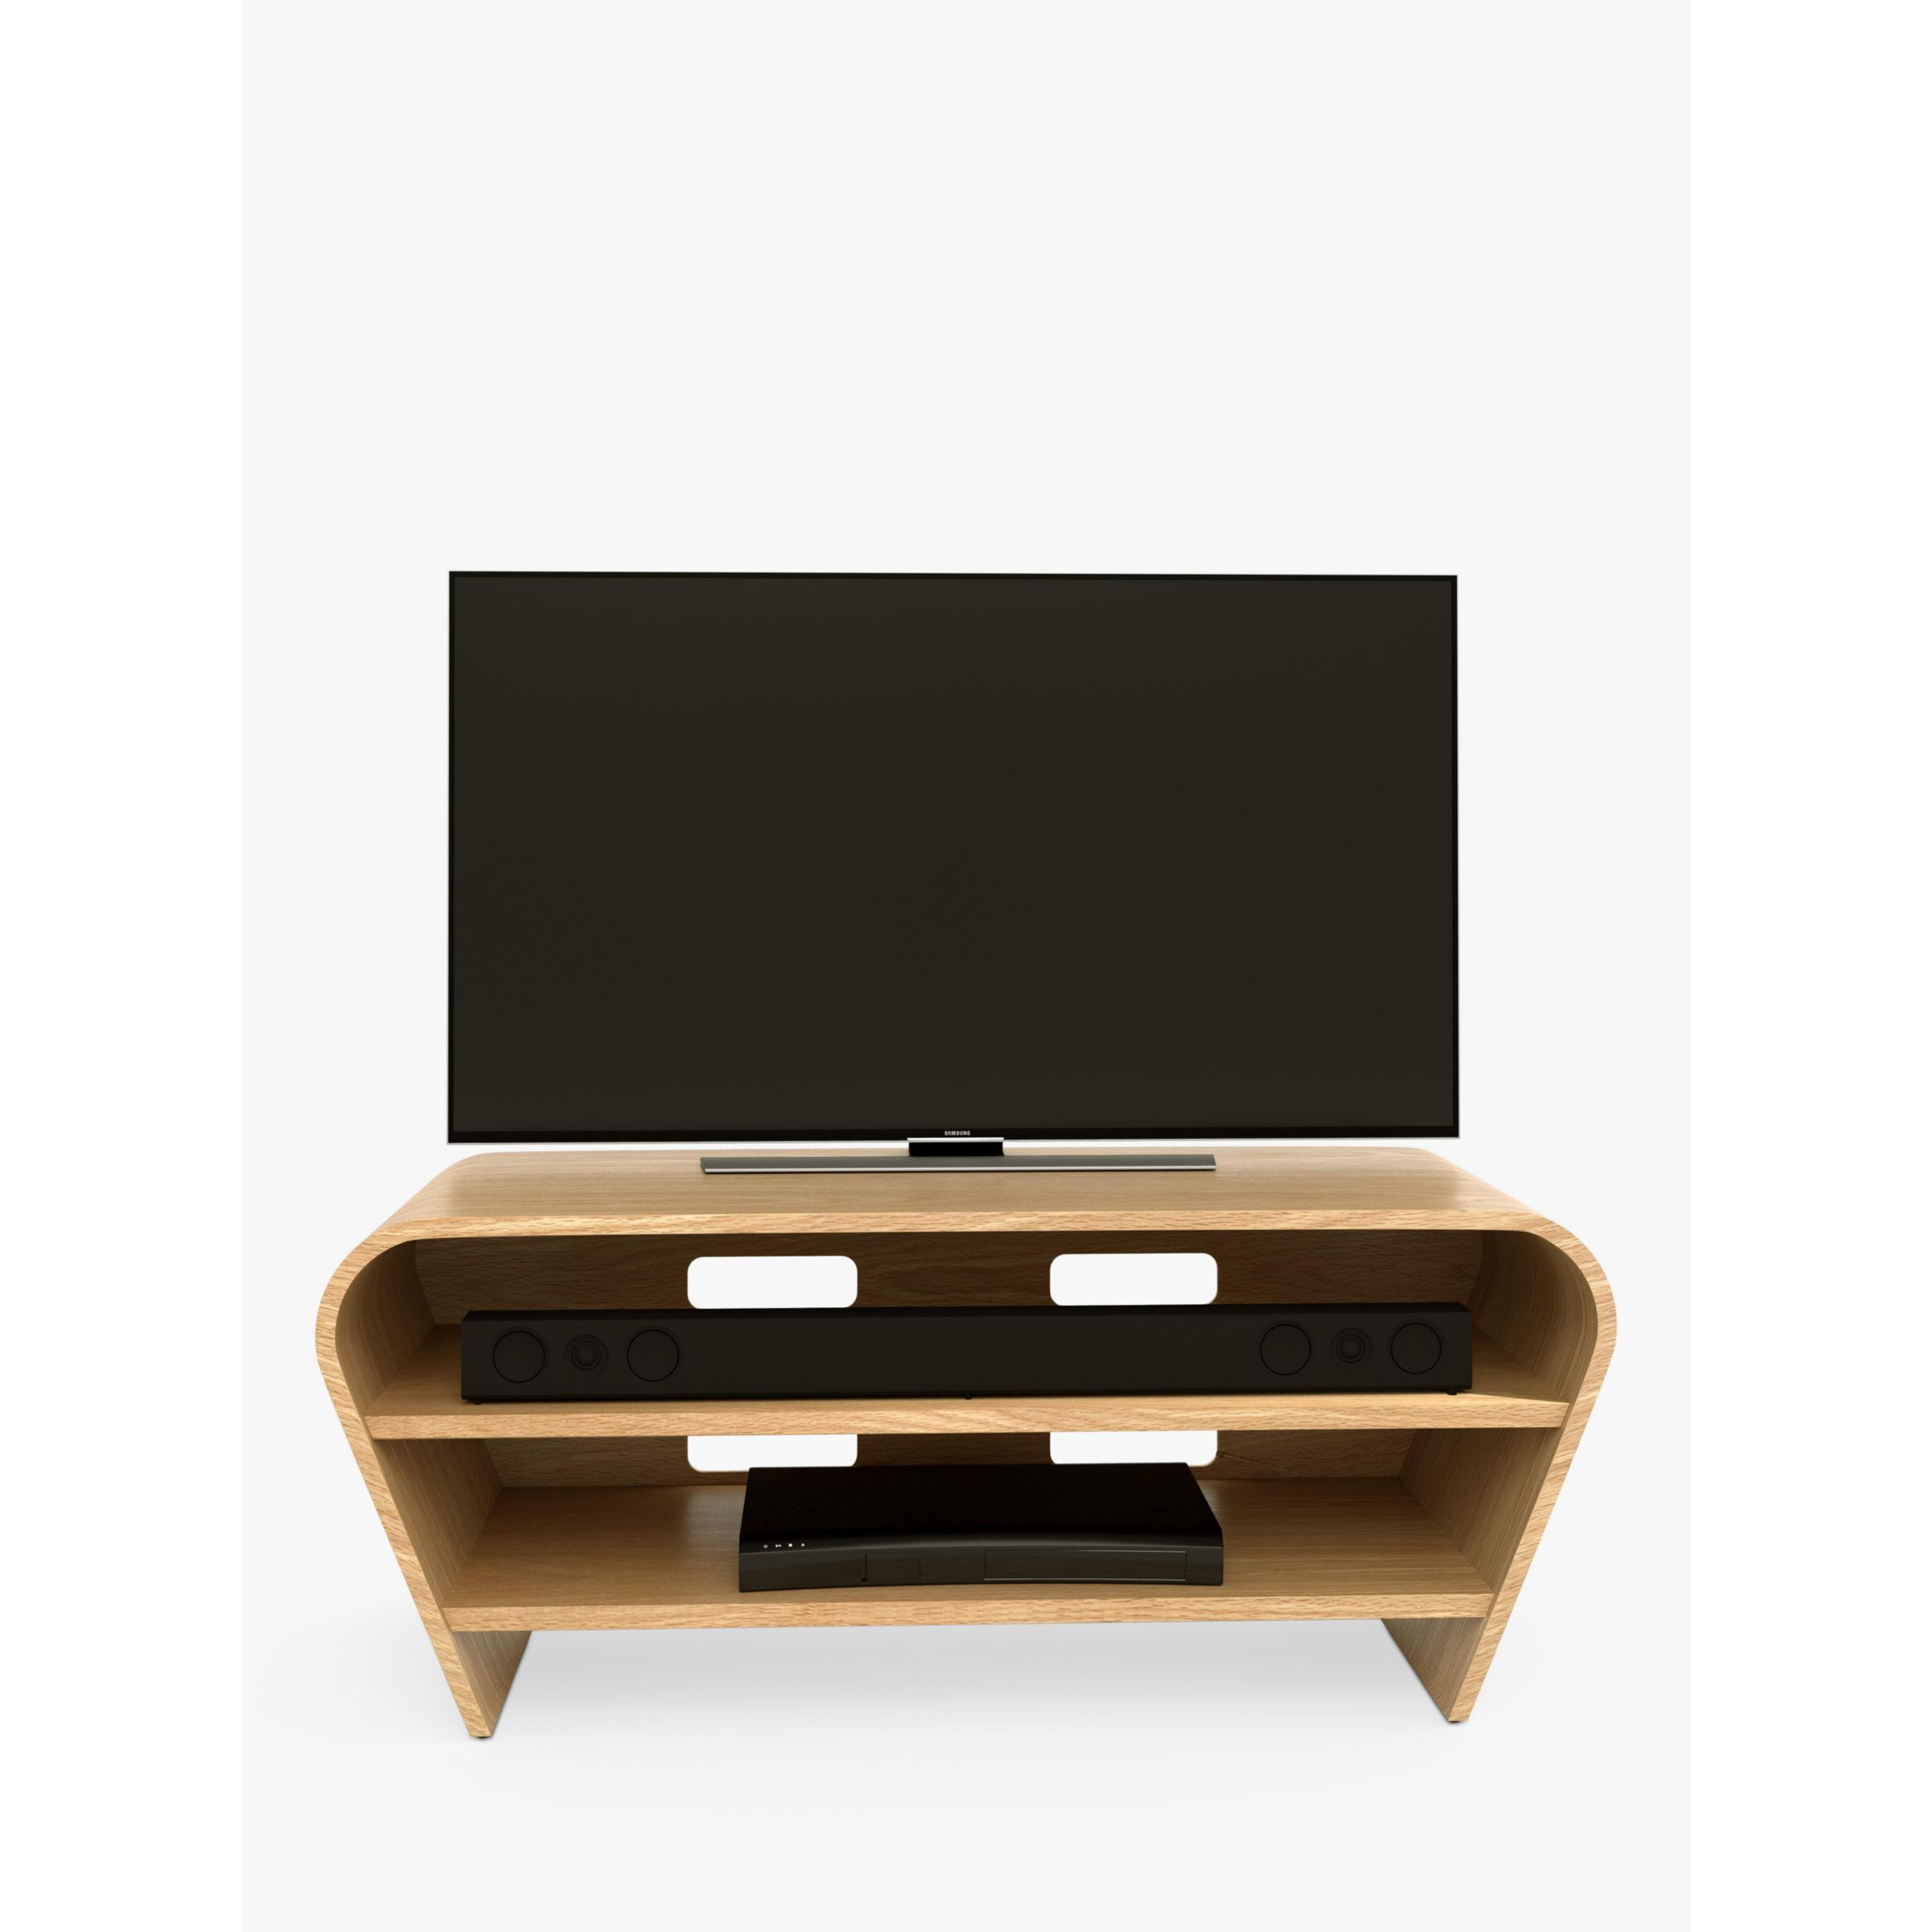 "Tom Schneider Taper 1050 TV Stand for TVs up to 45""" - image 1